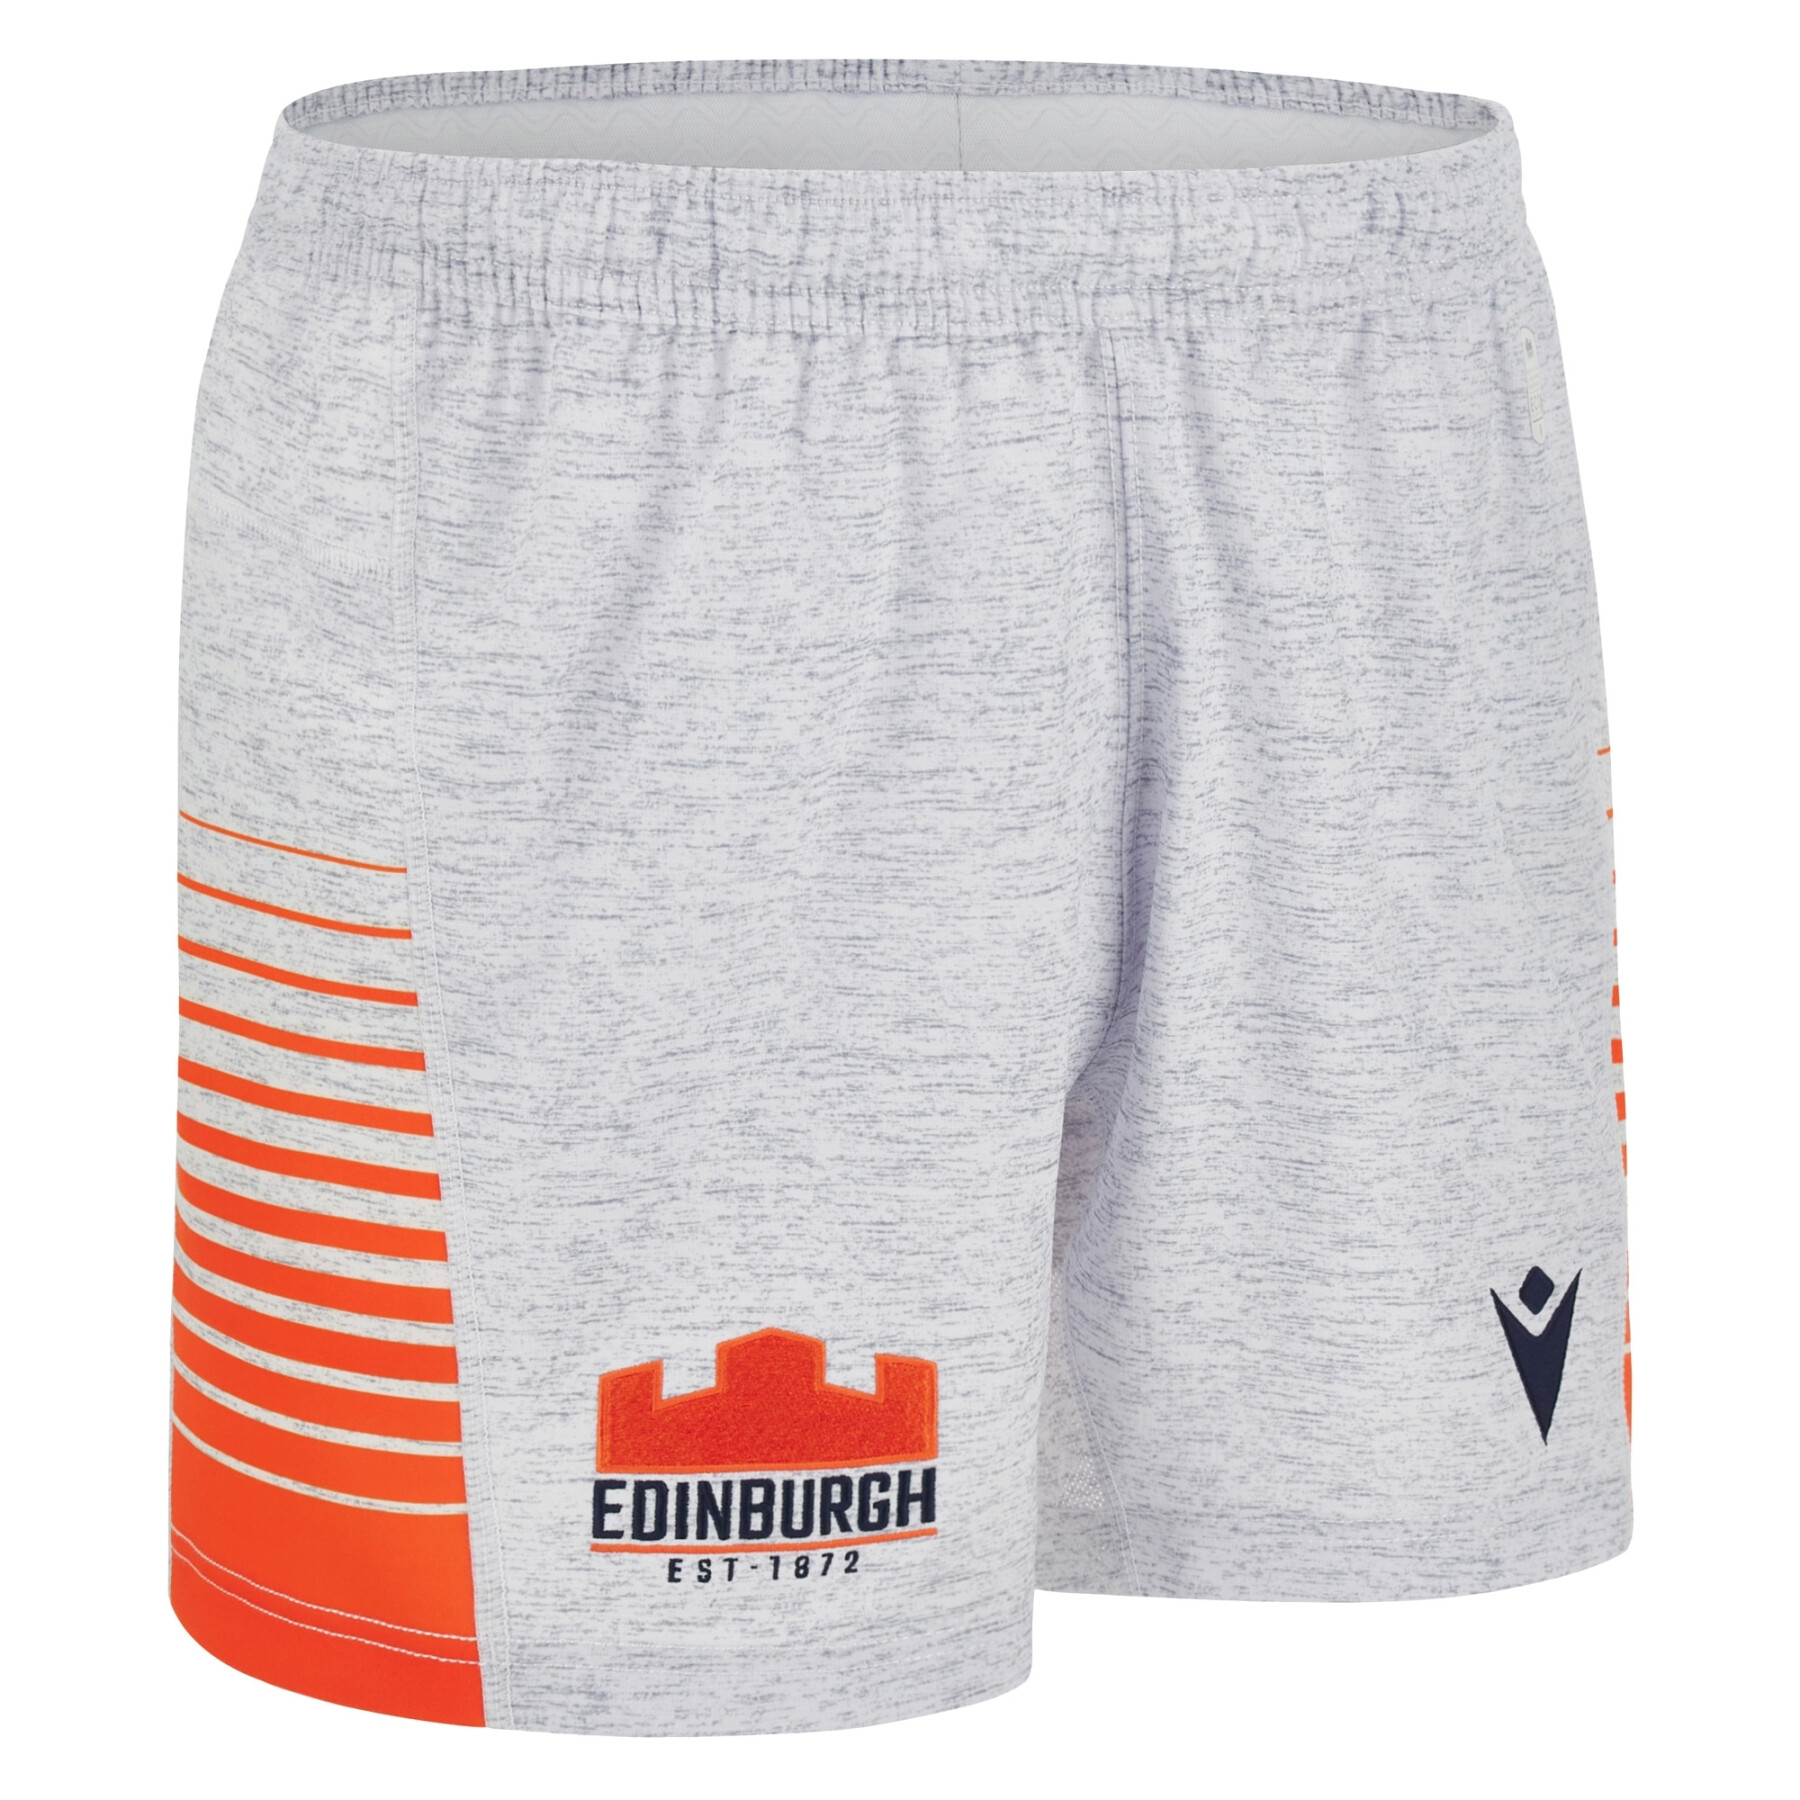 Authentic outdoor shorts Édimbourg Rugby